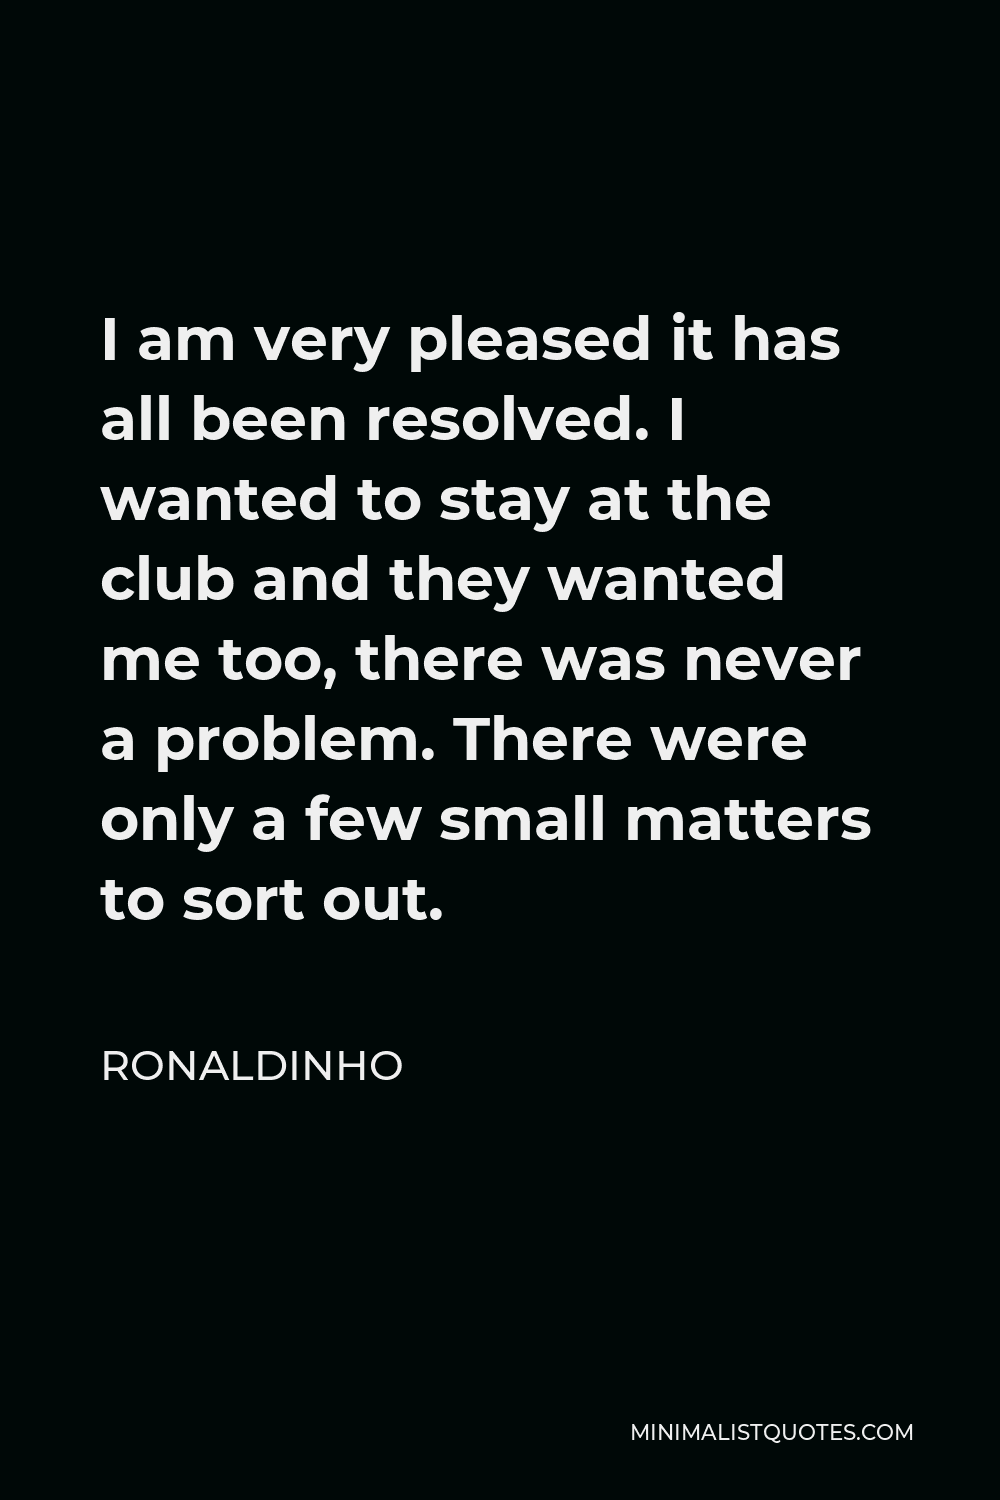 Ronaldinho Quote - I am very pleased it has all been resolved. I wanted to stay at the club and they wanted me too, there was never a problem. There were only a few small matters to sort out.